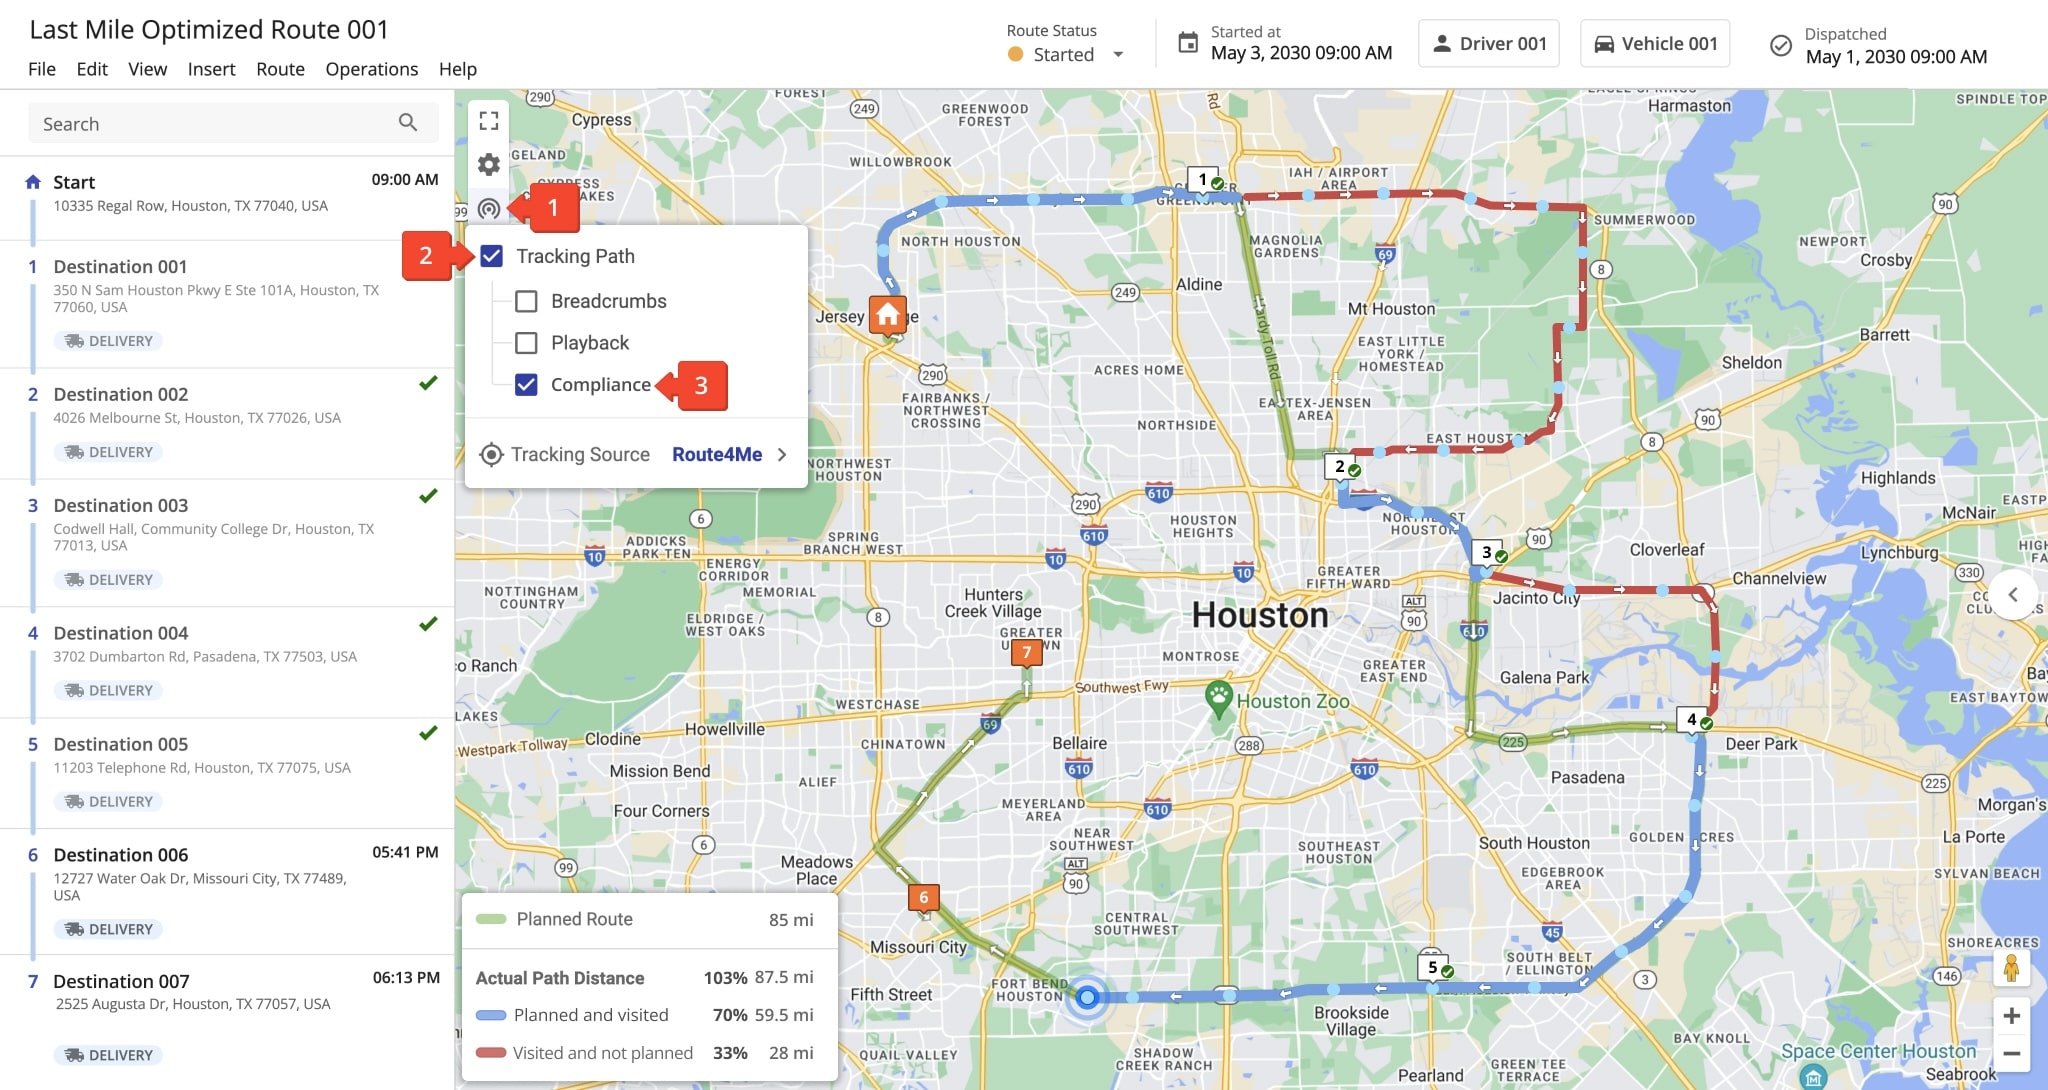 Route4Me's GPS route compliance tracking enables you to see if planned routes are followed, when and where deviations and detours occur, how much of the planned route was completed, and more.